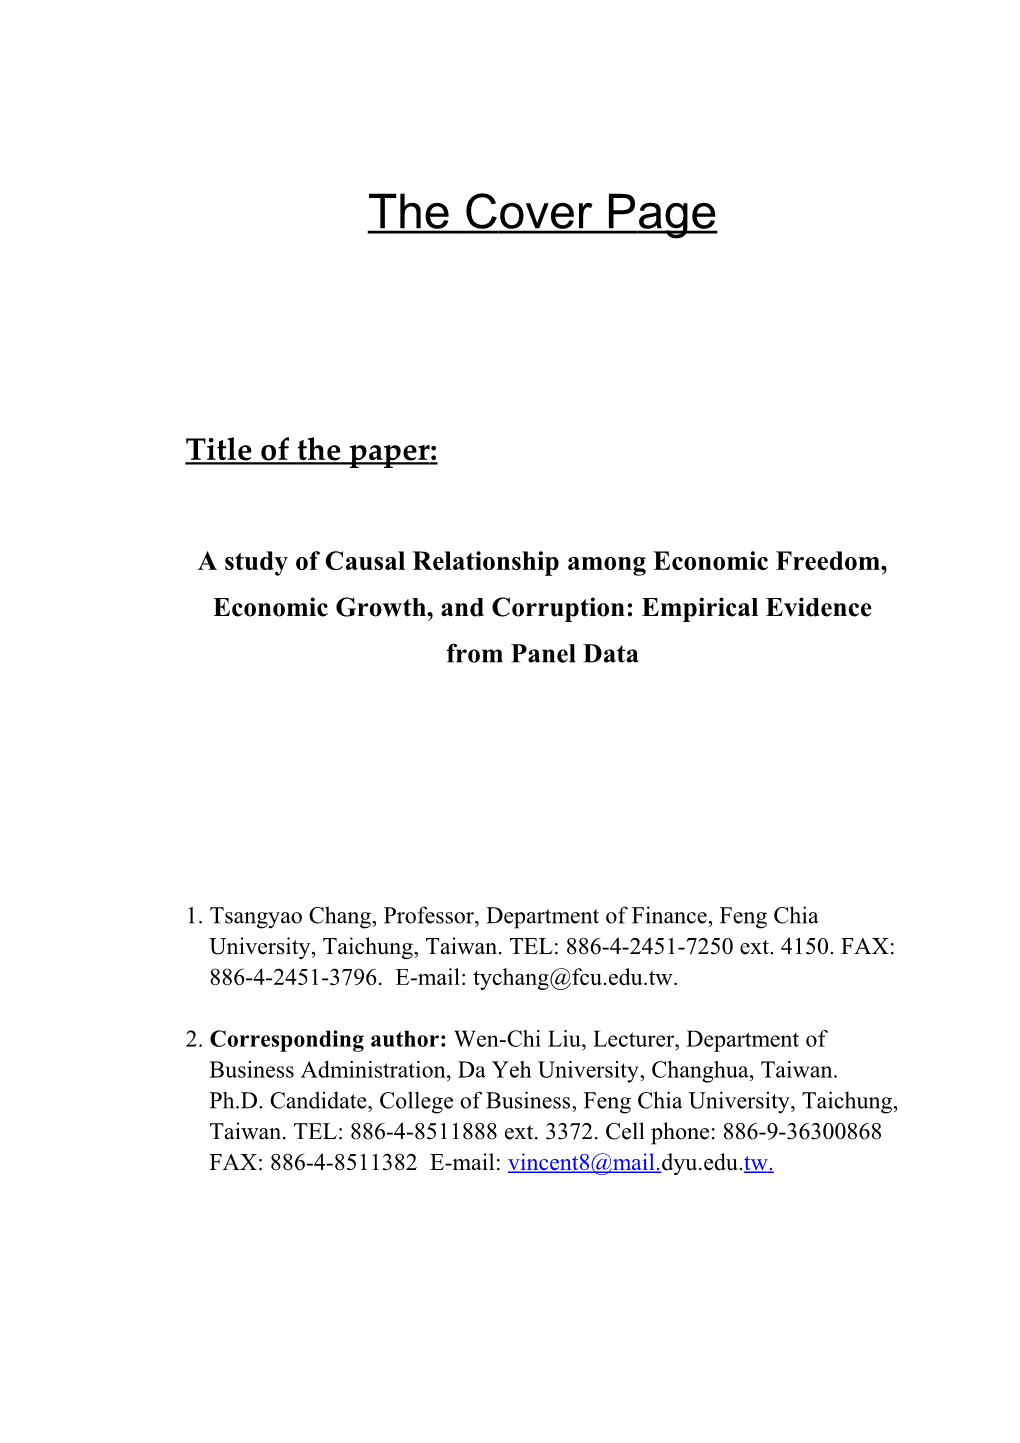 A Study to Examine the Long-Run Relationship Among Corruption, Economic Growth, and Economic